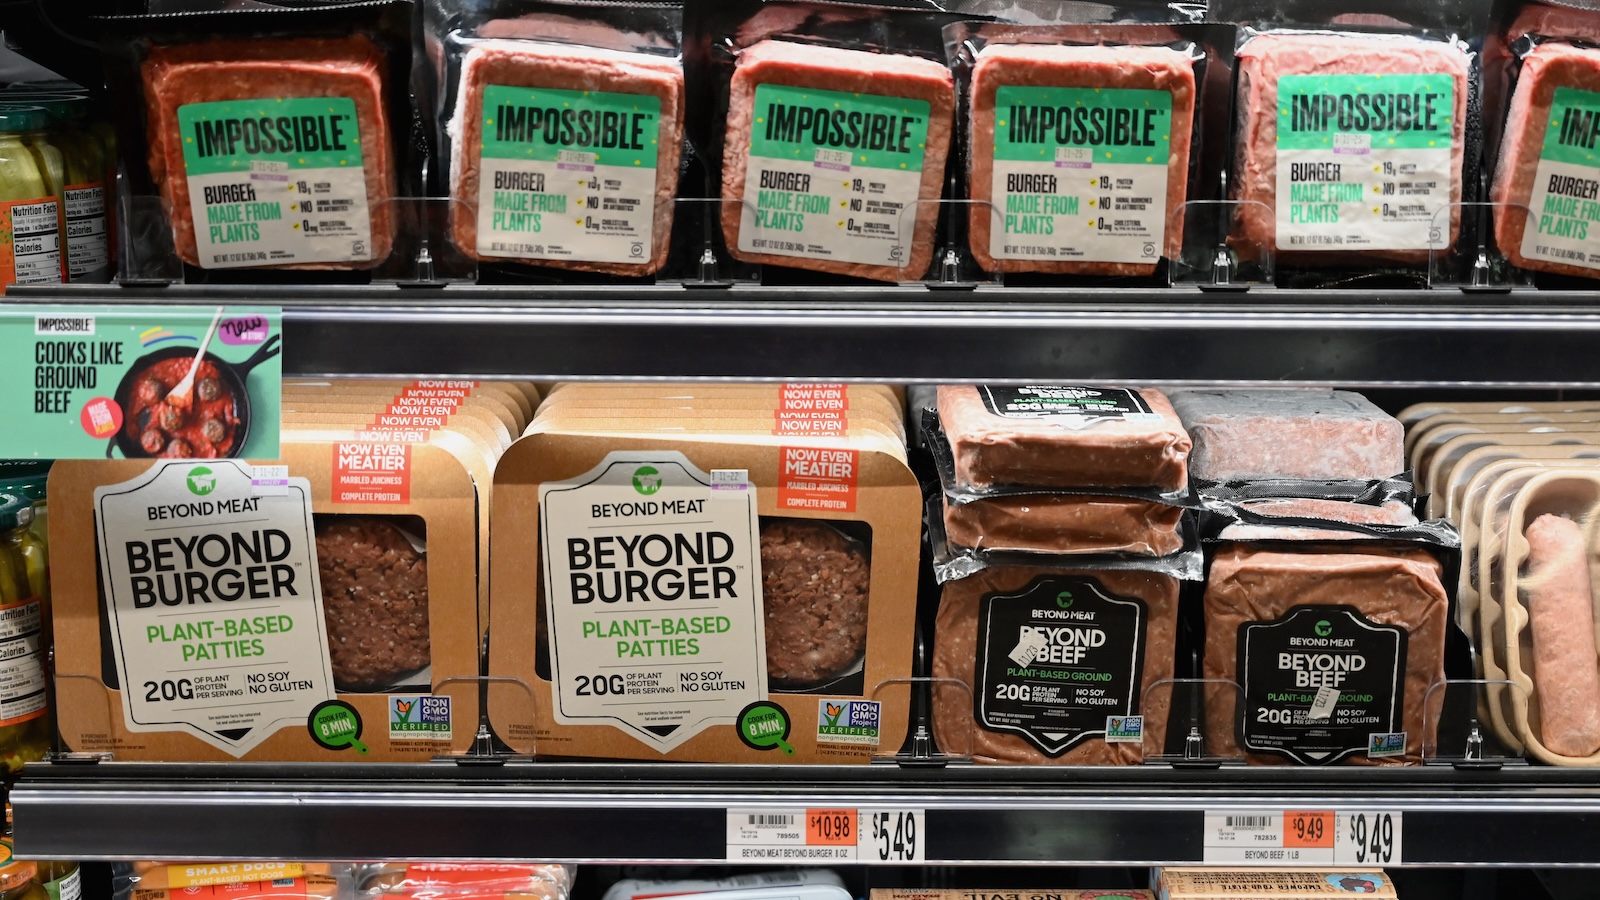 Plant-based meat needs government support to scale up, but a culture war stands in the way